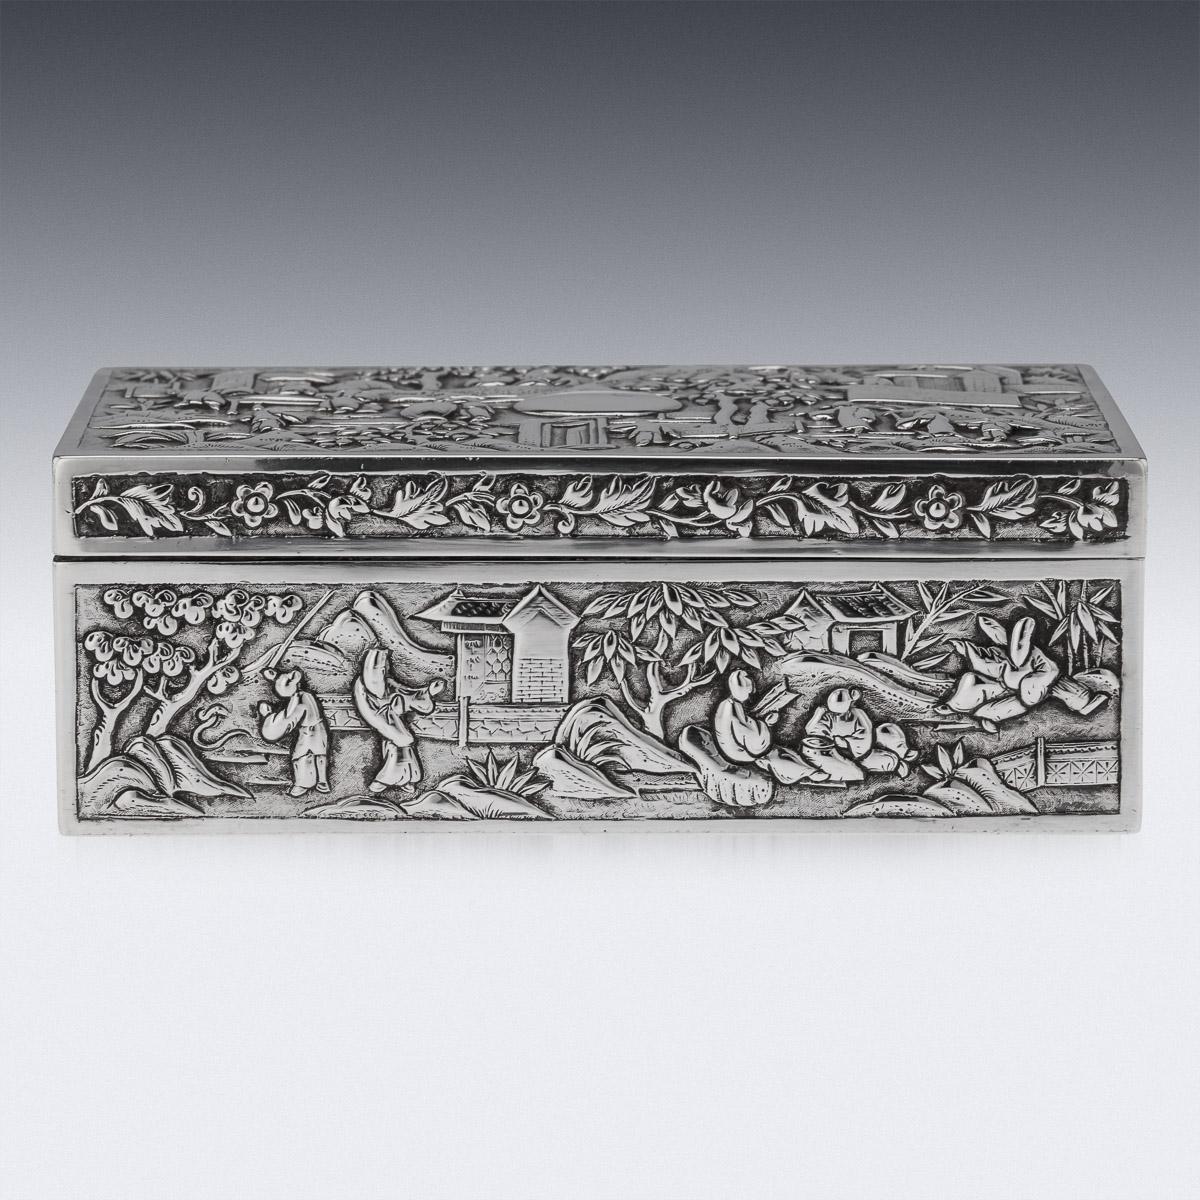 Antique 19th Century Chinese export solid silver box, of rectangular form, decorated in repousse' high relief, on very finely tooled matted ground, depicting various figures in a landscape, including dignitaries, attendants amongst palaces,